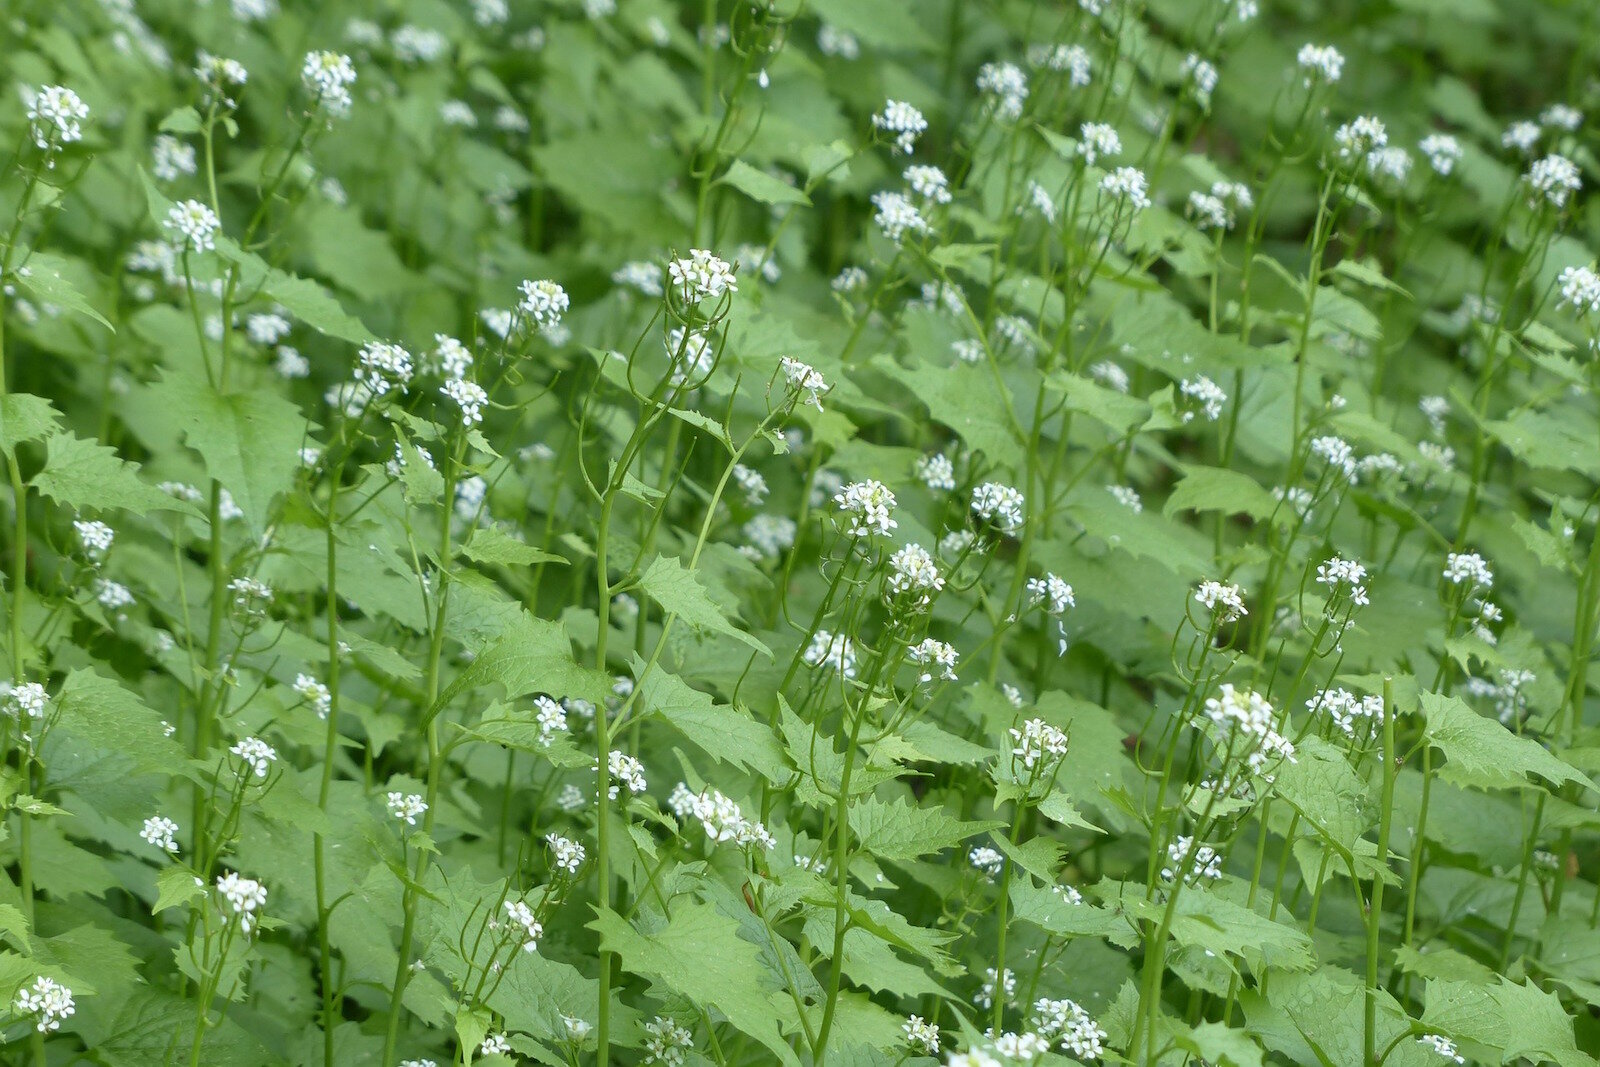 A single garlic mustard plant can produce up to 350 to 7,000 seeds depending on the size of the plant, and these seeds can stay viable in the ground for up to 10 years. 